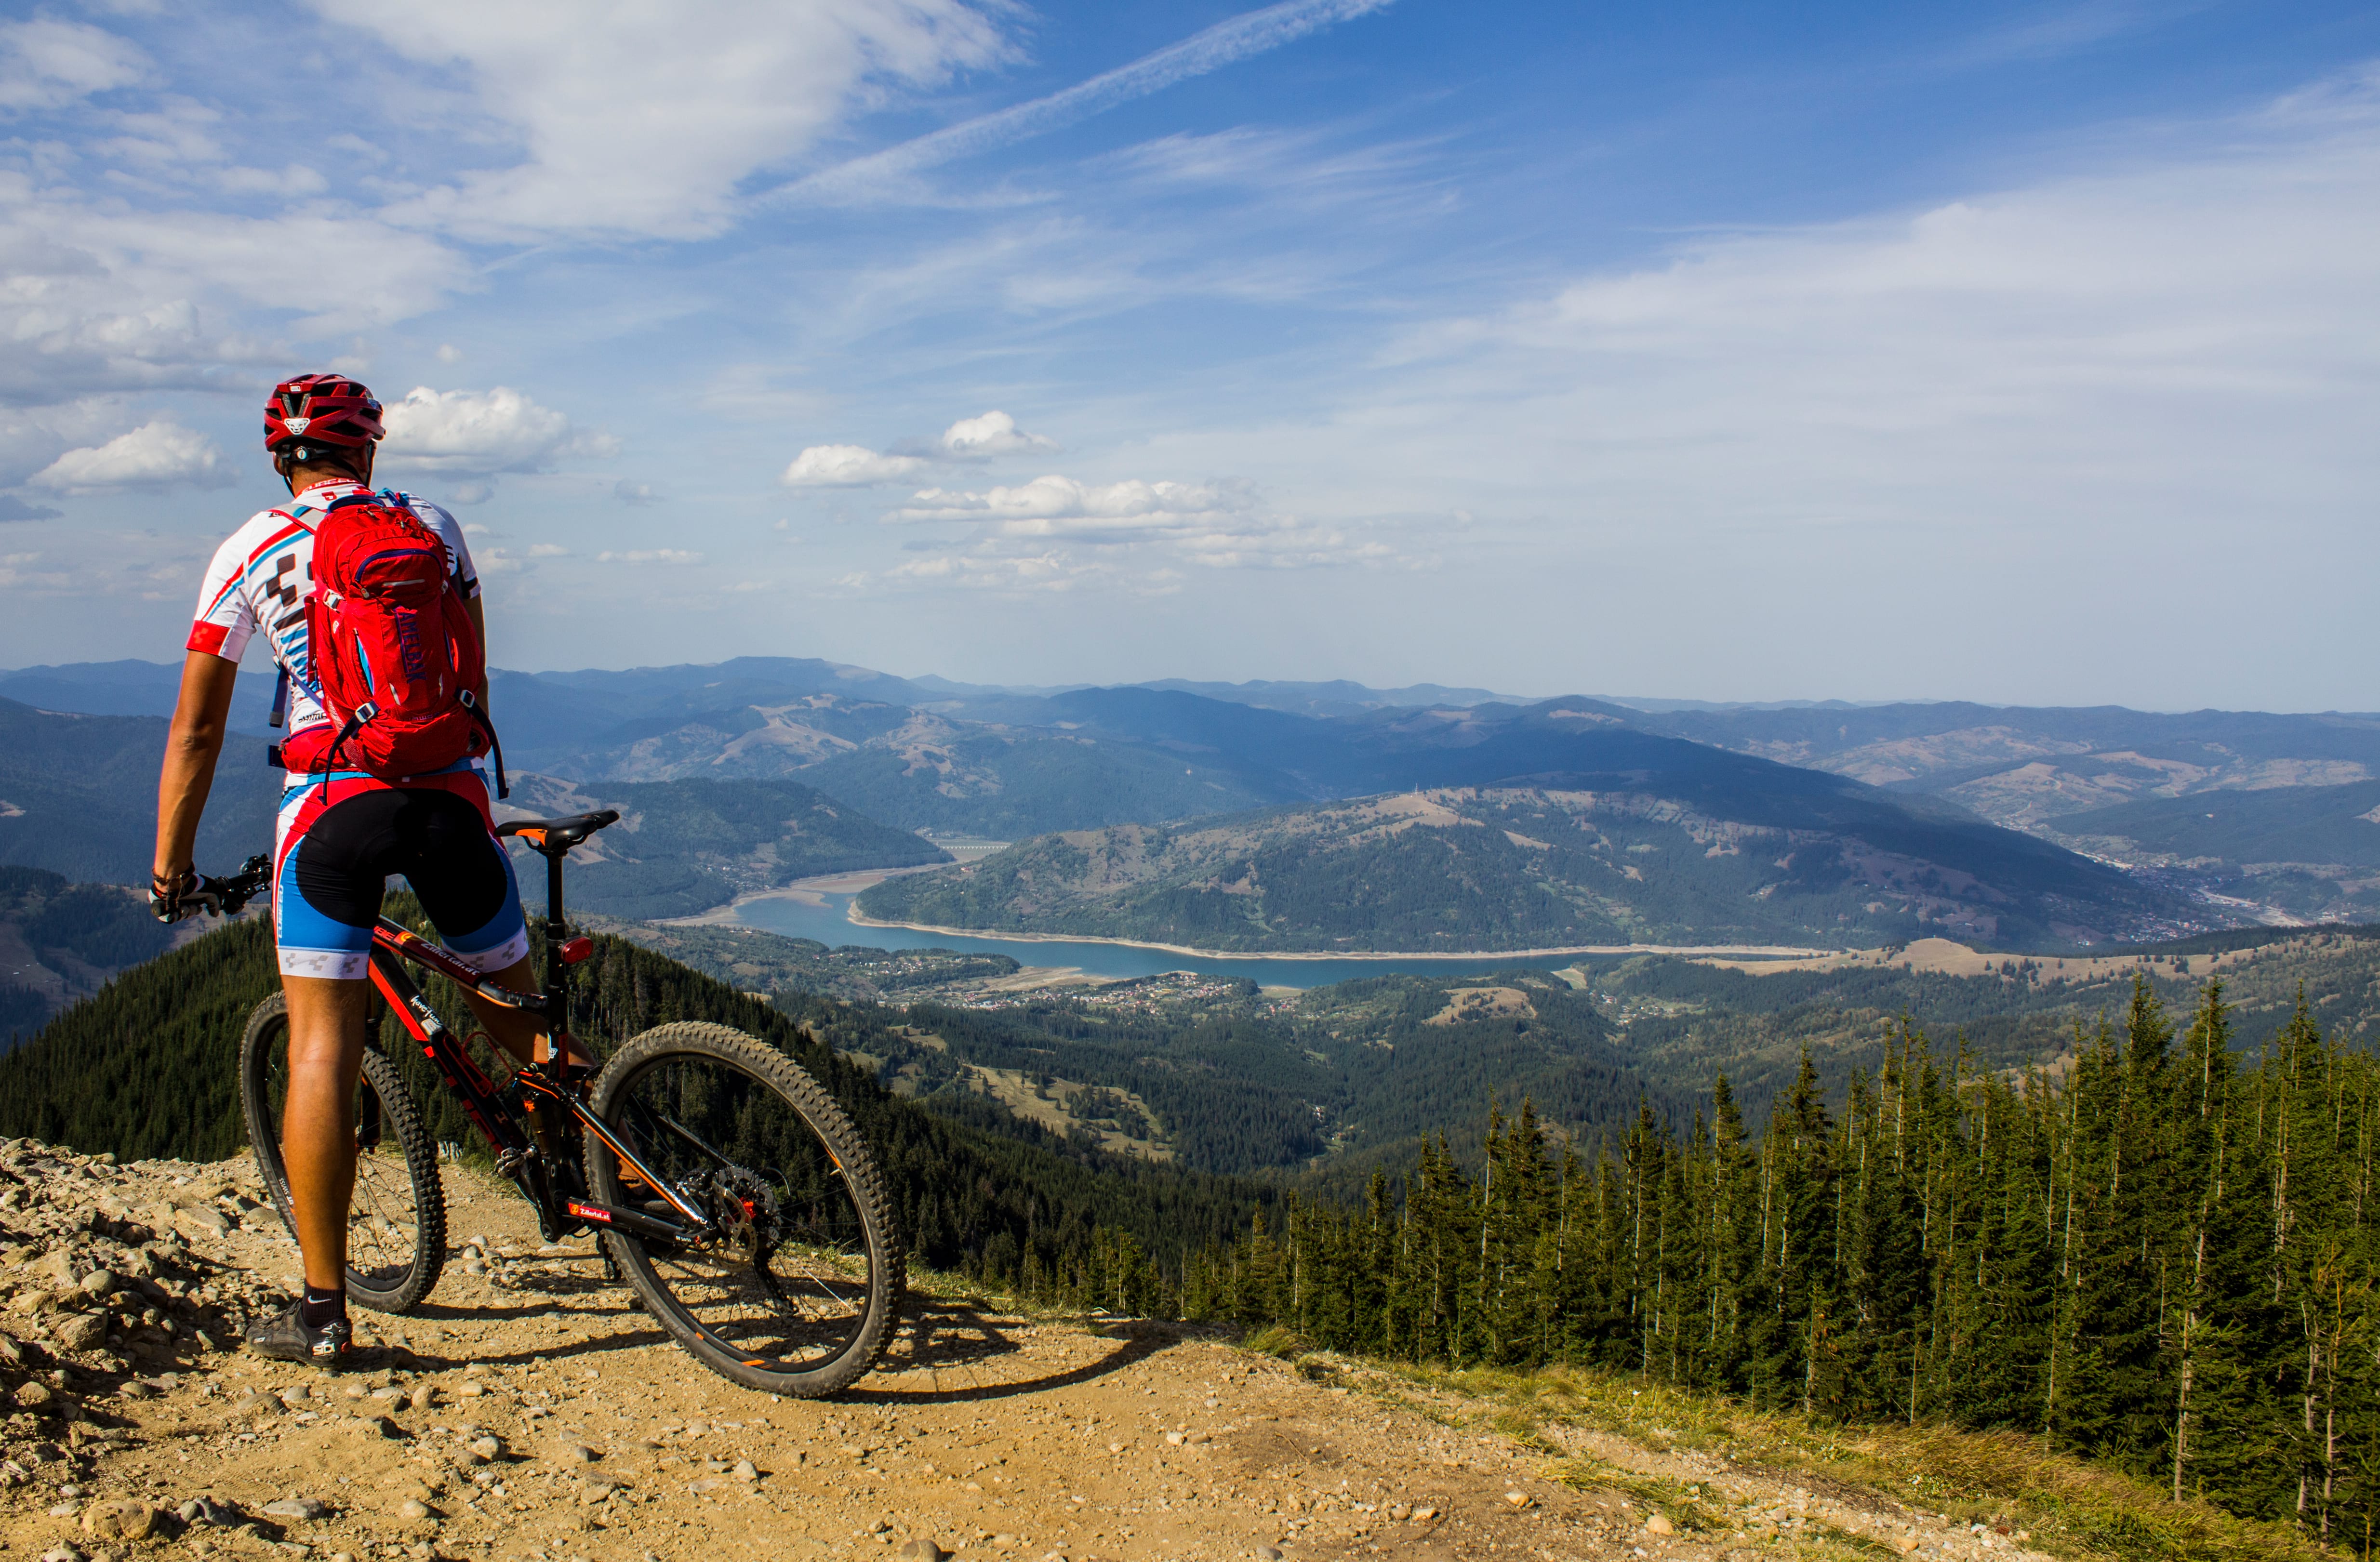 beautiful panorama of mountains and a lake with a biker in the center